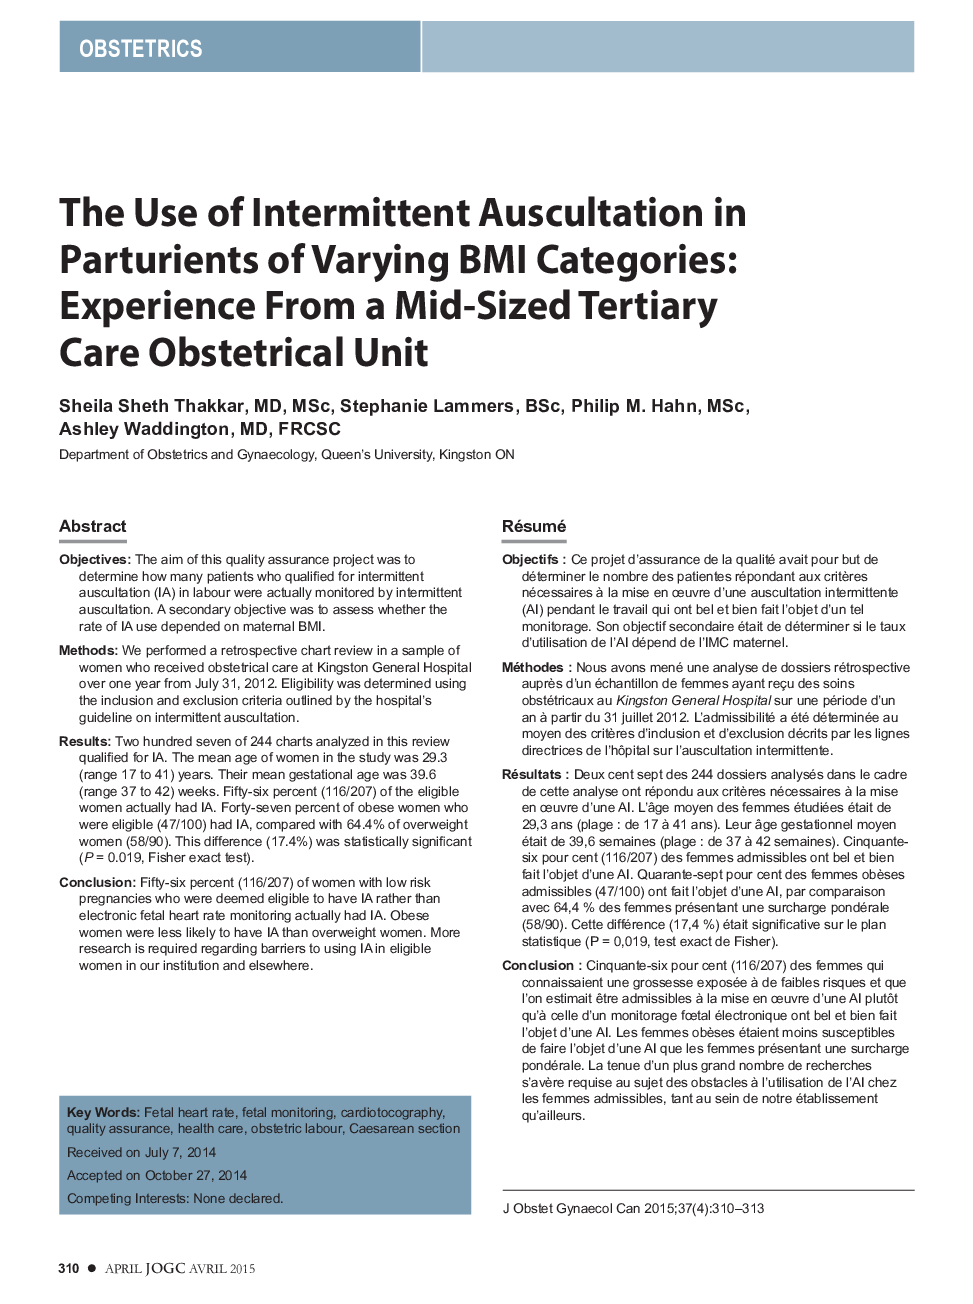 The Use of Intermittent Auscultation in Parturients of Varying BMI Categories: Experience From a Mid-Sized Tertiary Care Obstetrical Unit